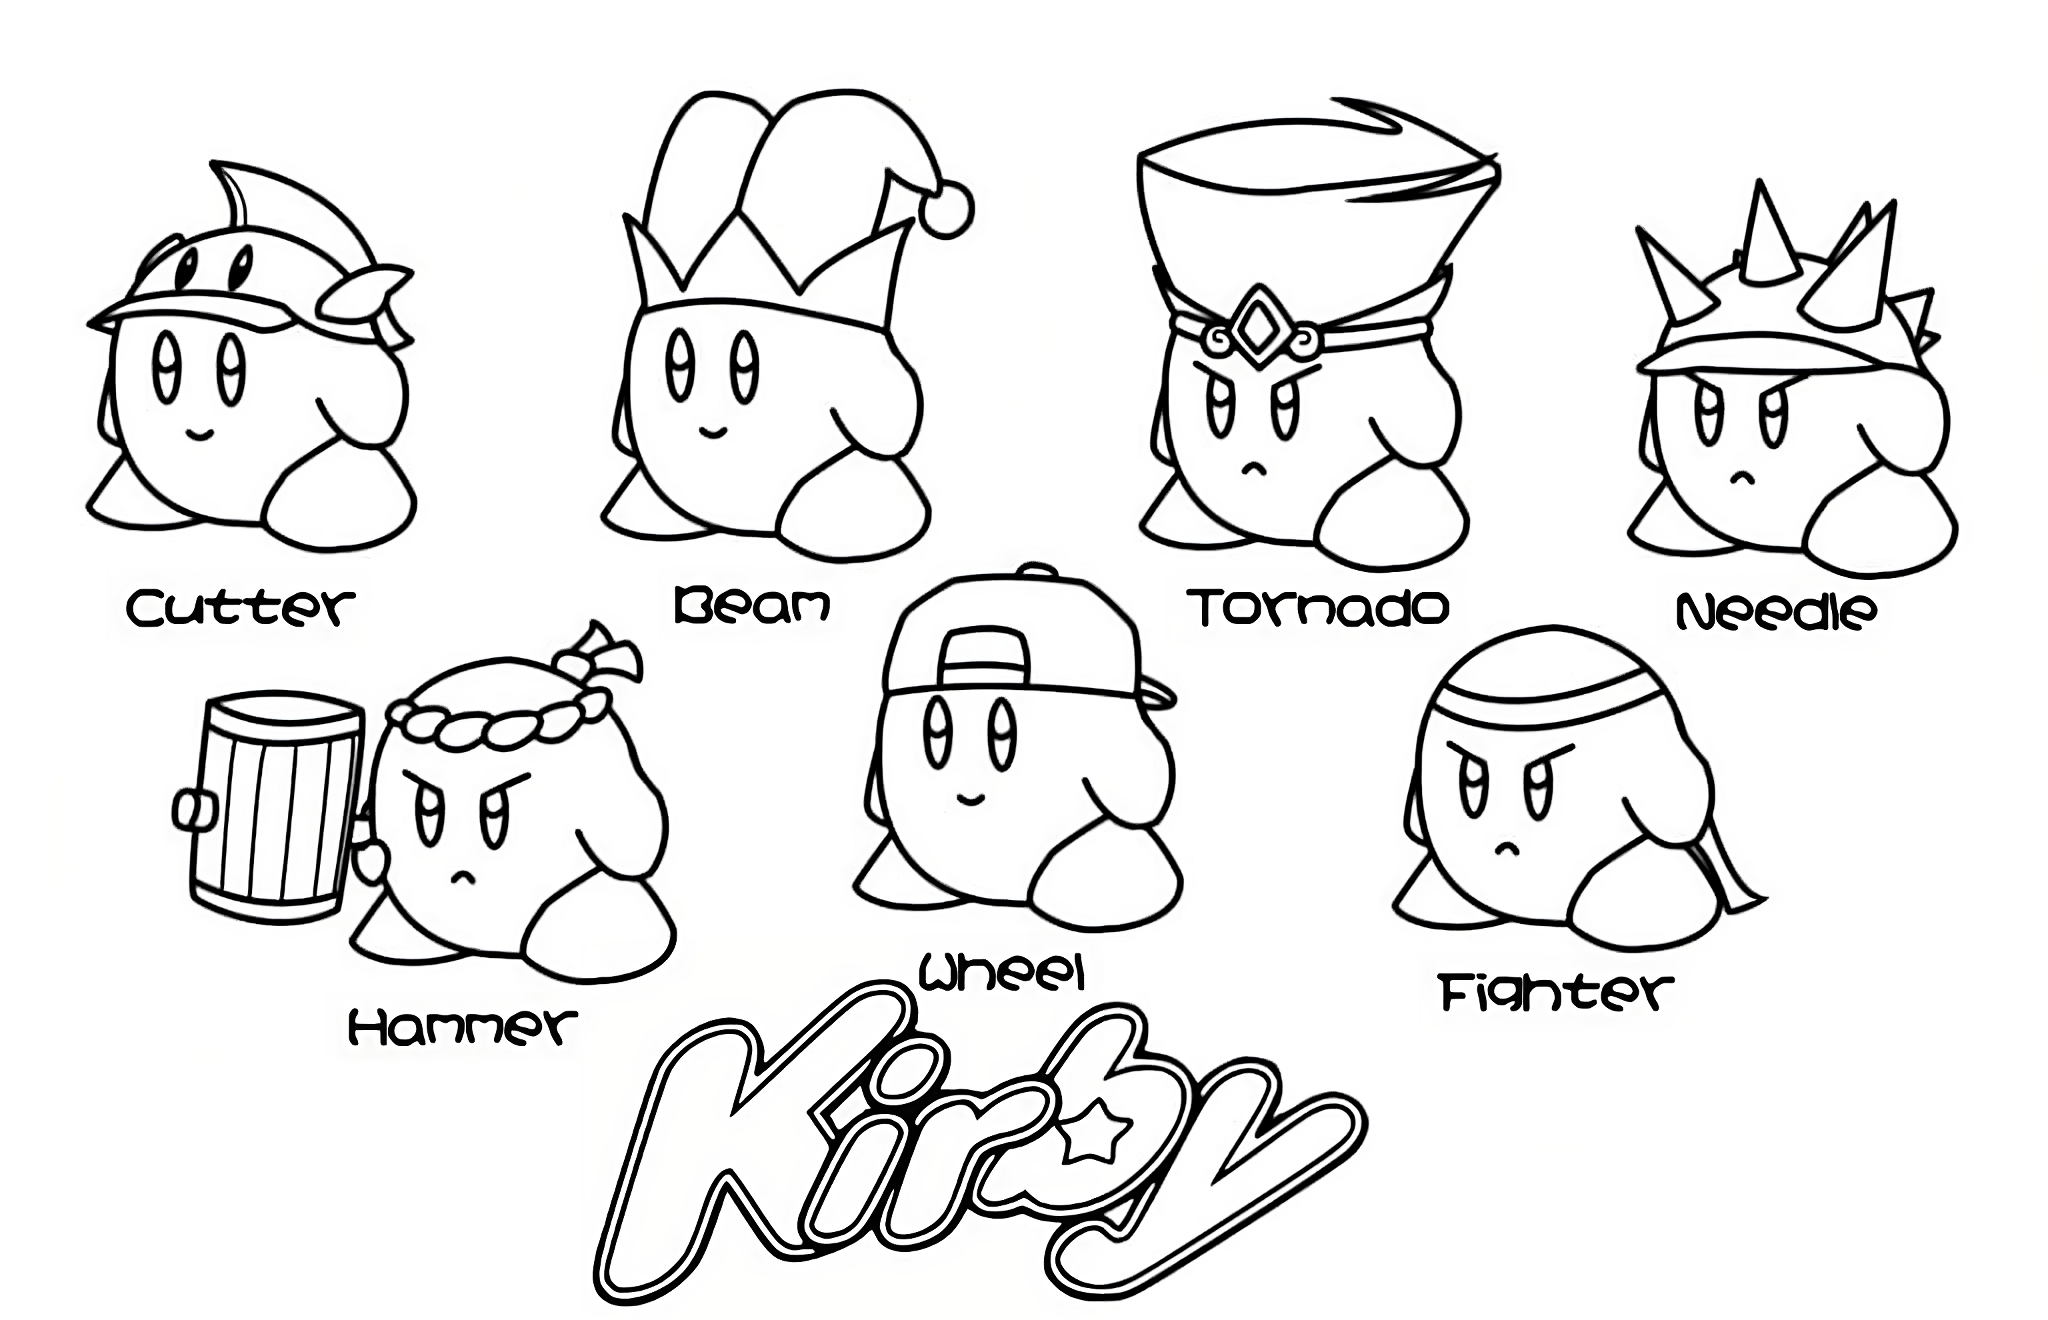 Kirby 10 of Kirby coloring page to print and color